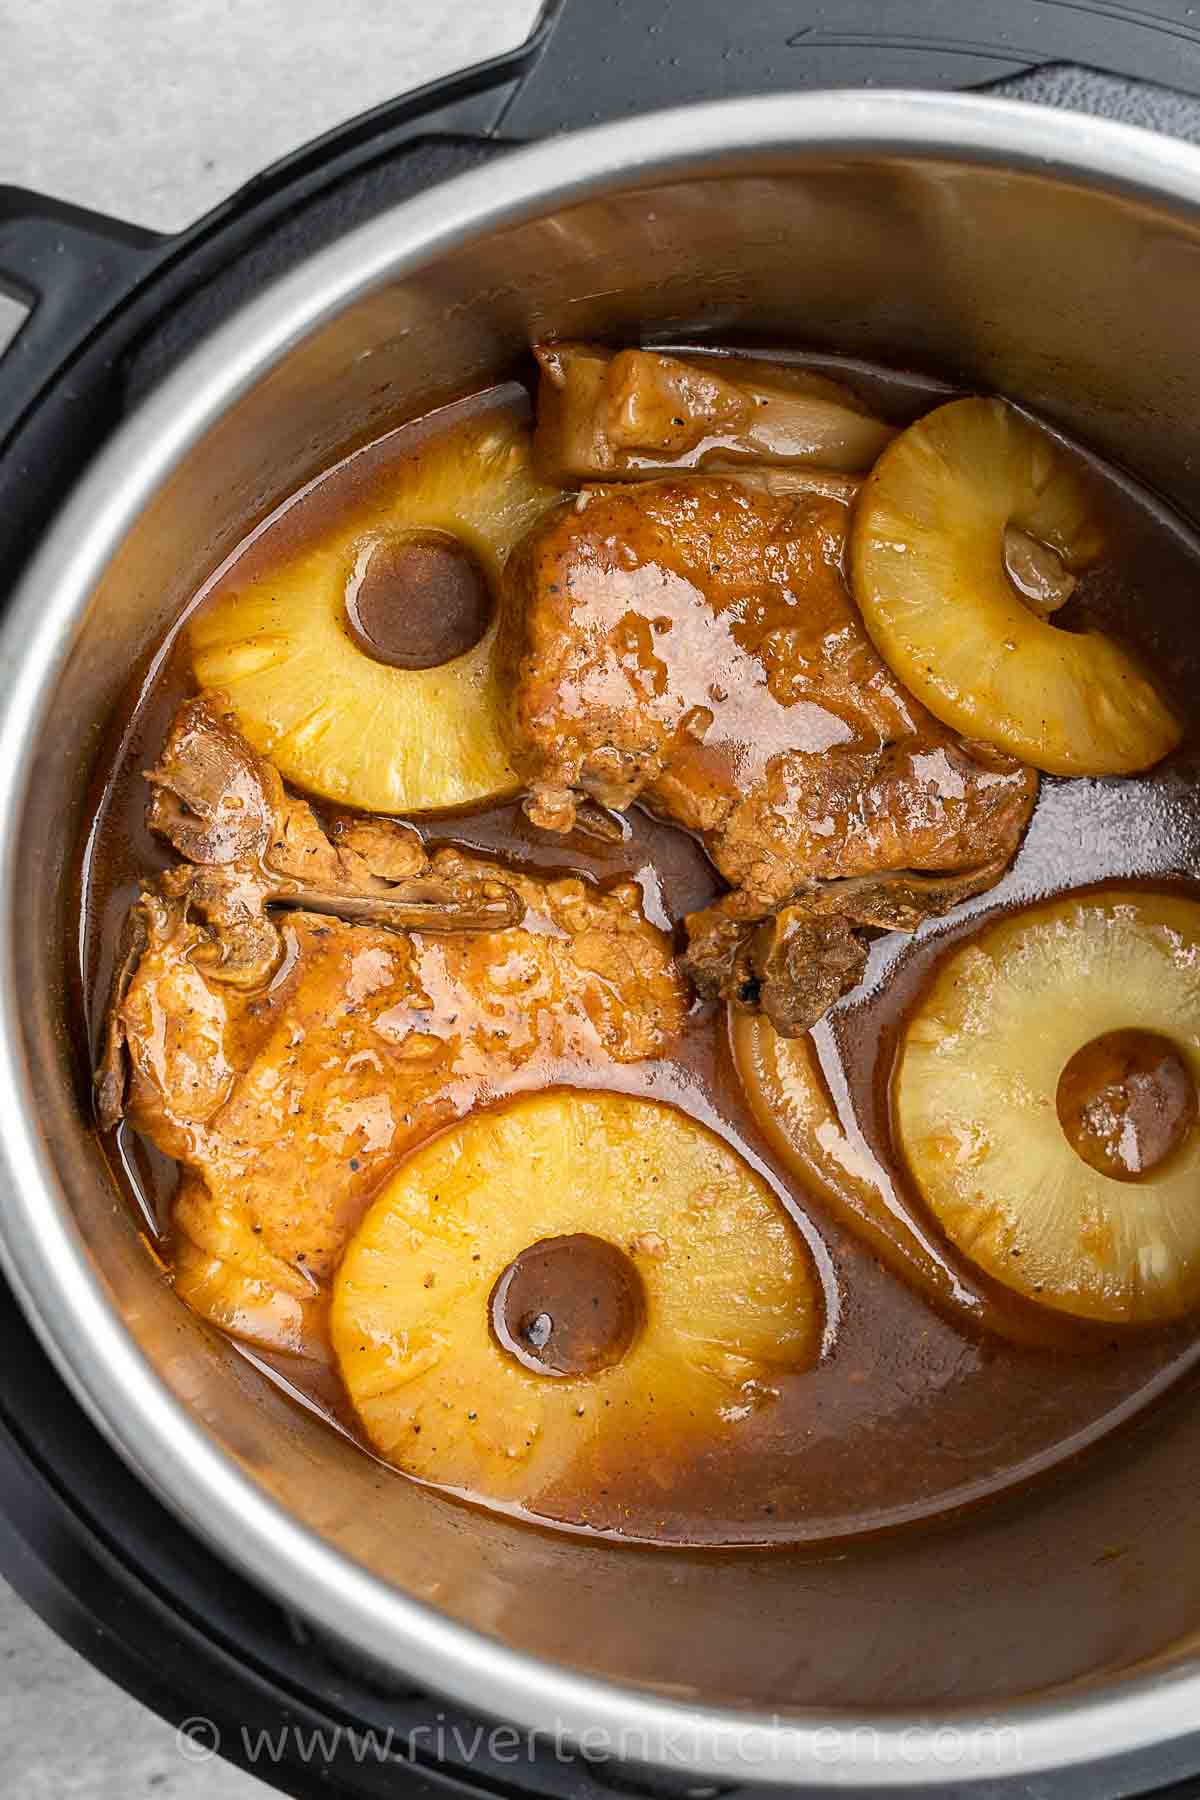 pineapple pork chops cooked in an Instant pot pressure cooker.